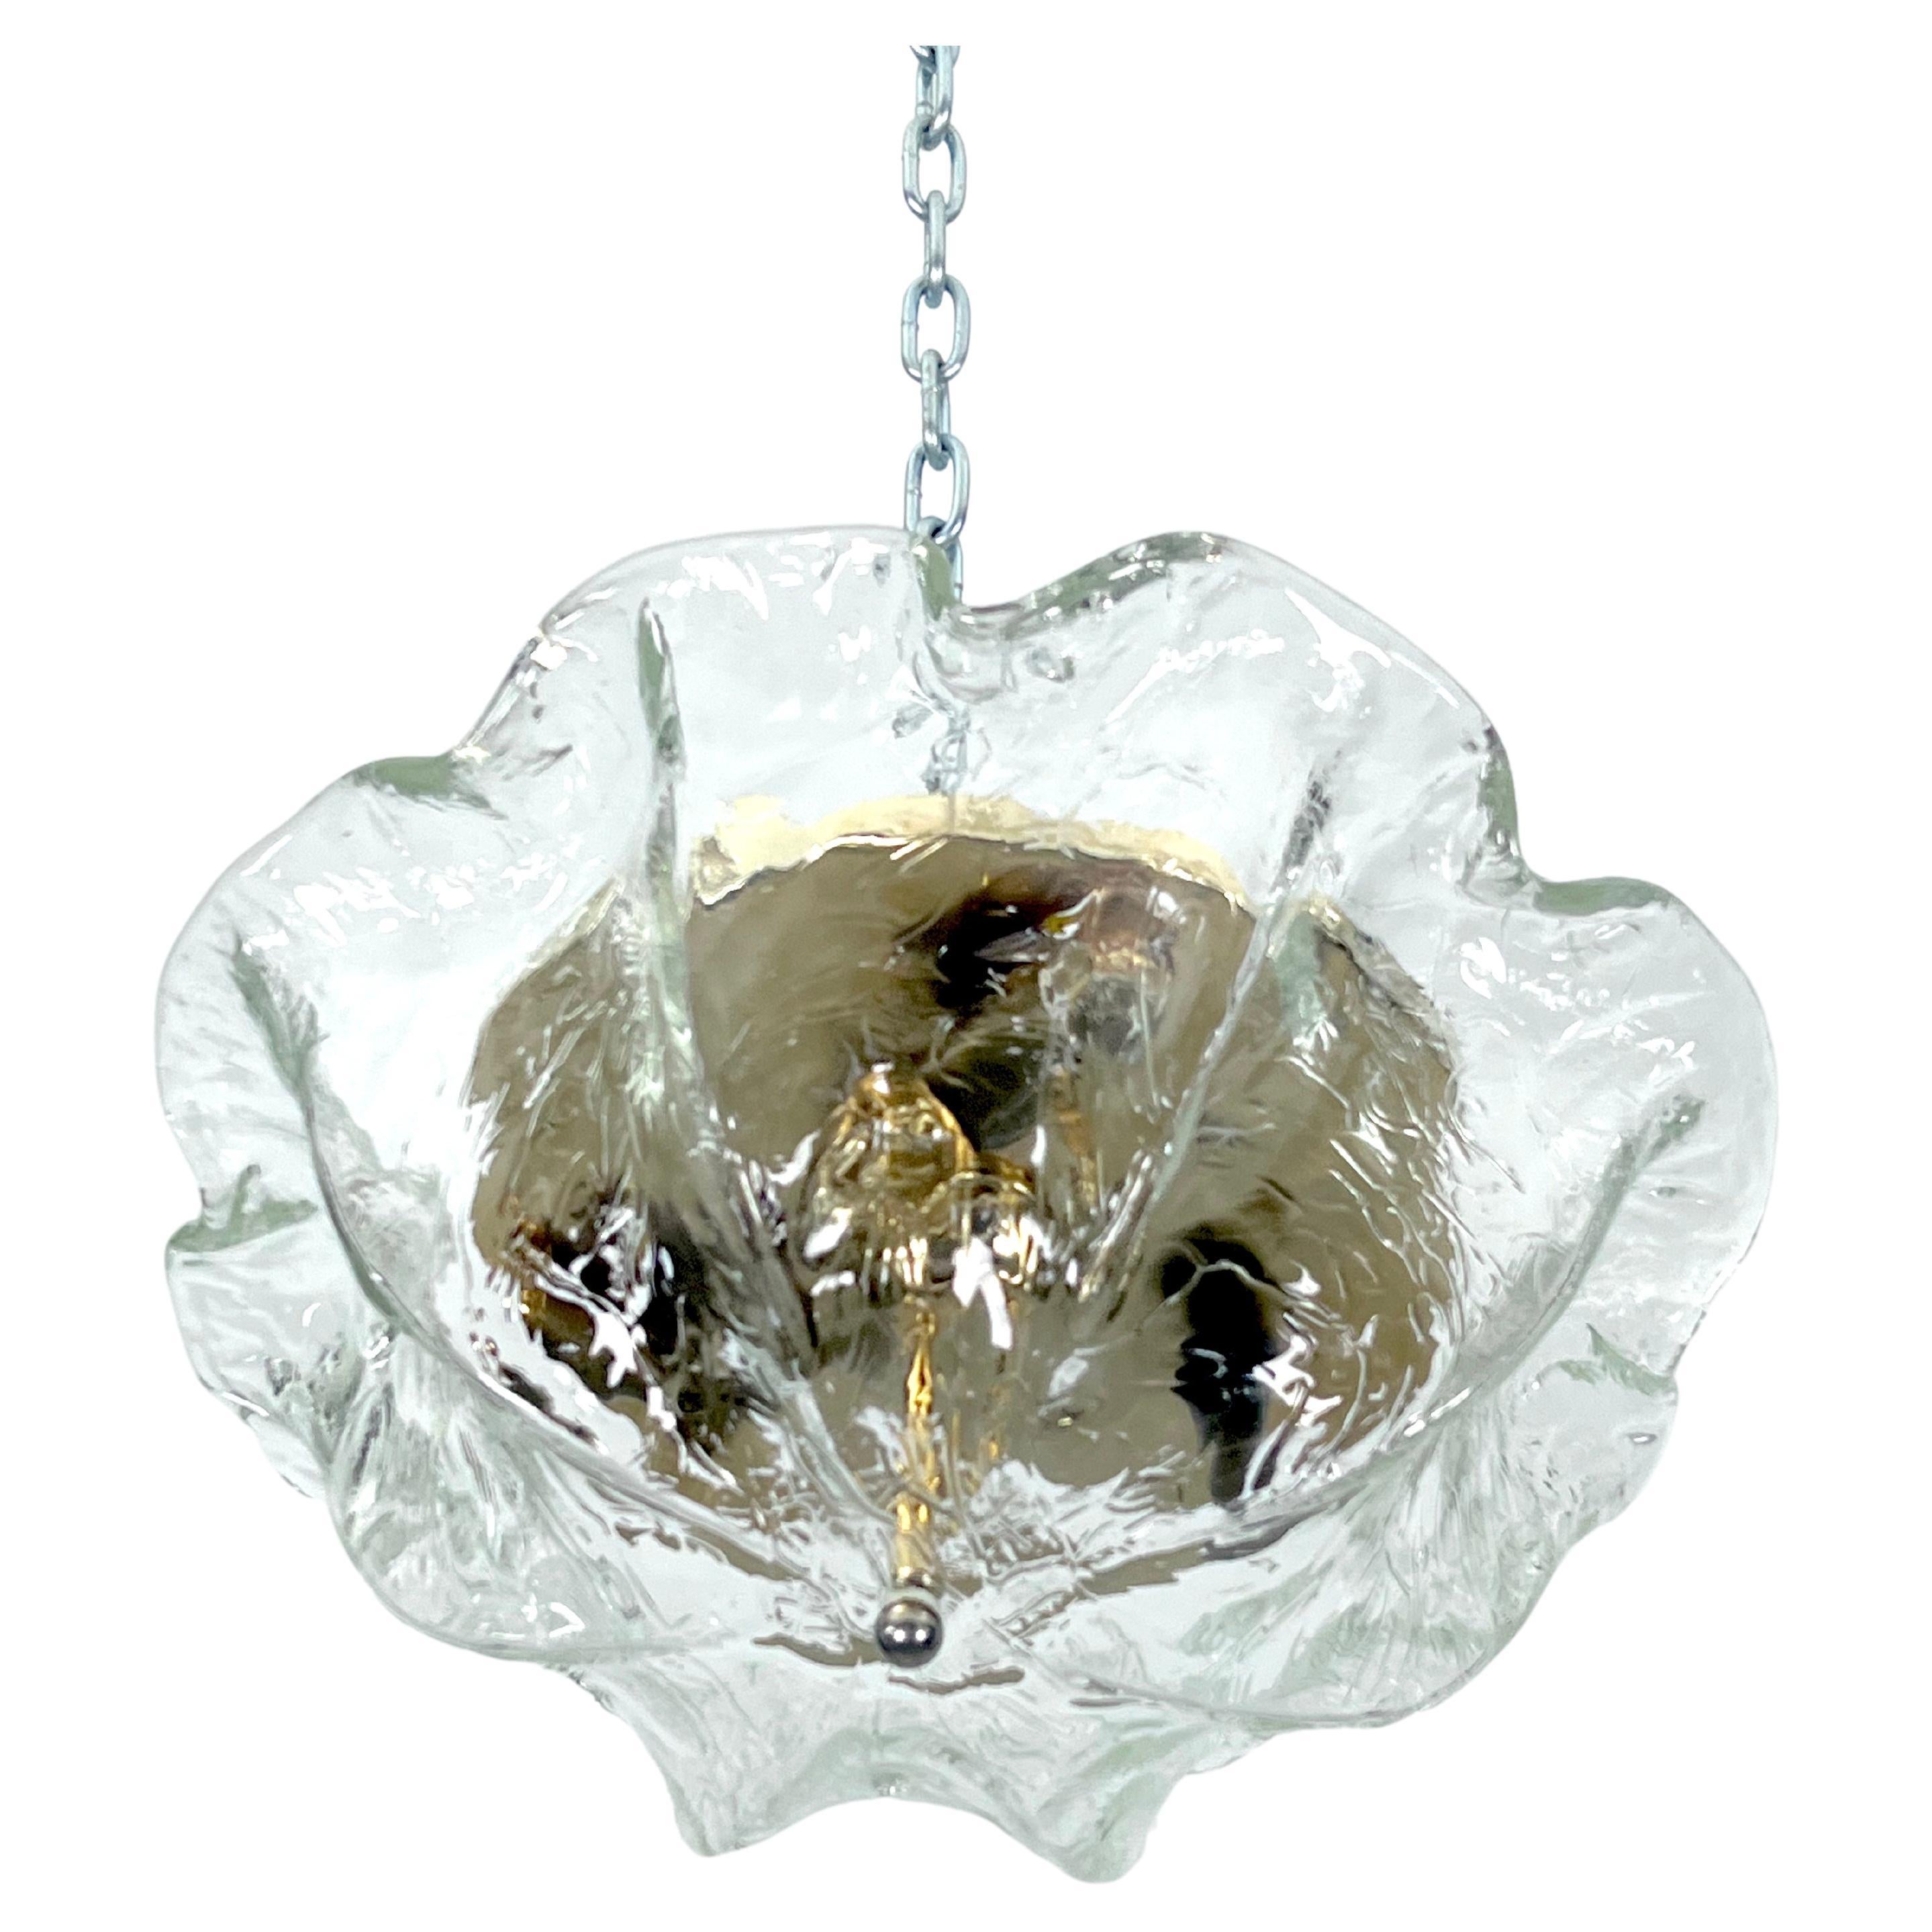 Vintage La Murrina ceiling lamp in clear Murano glass and brass. Italy 1980s